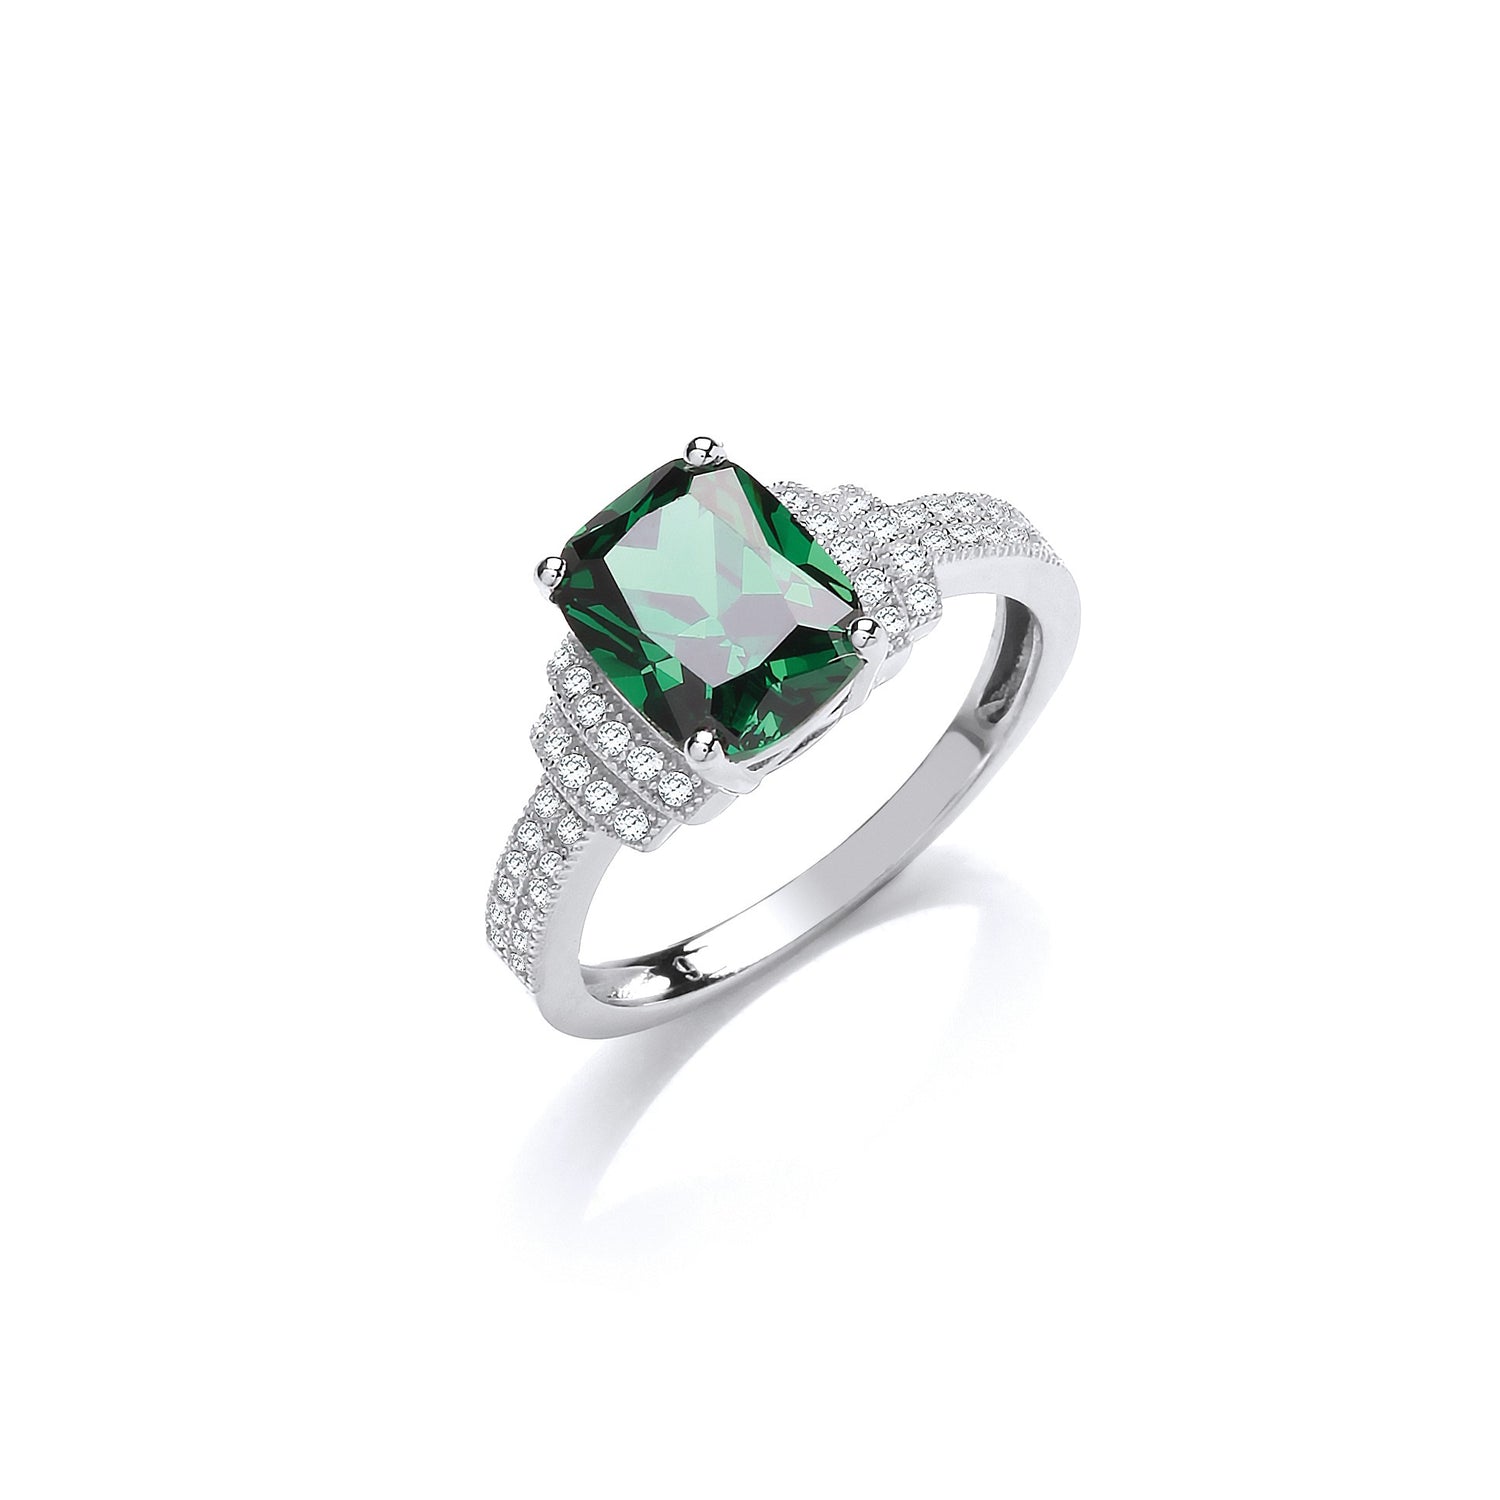 EMILY — Silver and Green CZ Dress Ring